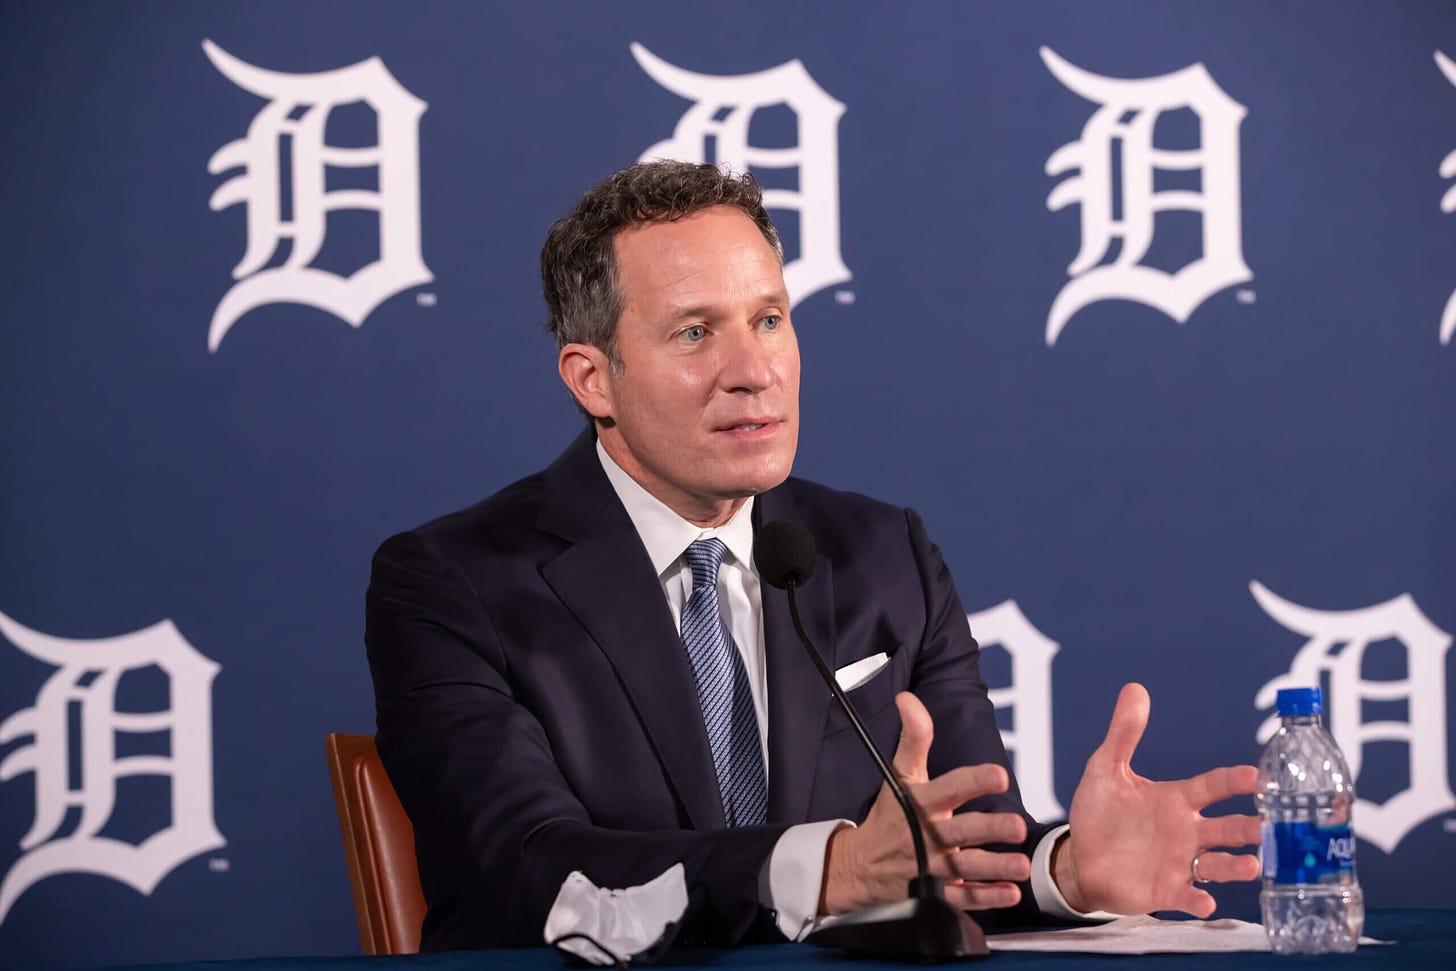 Tigers' Christopher Ilitch seems prepared to bring 'high-impact players' to  Detroit - The Athletic